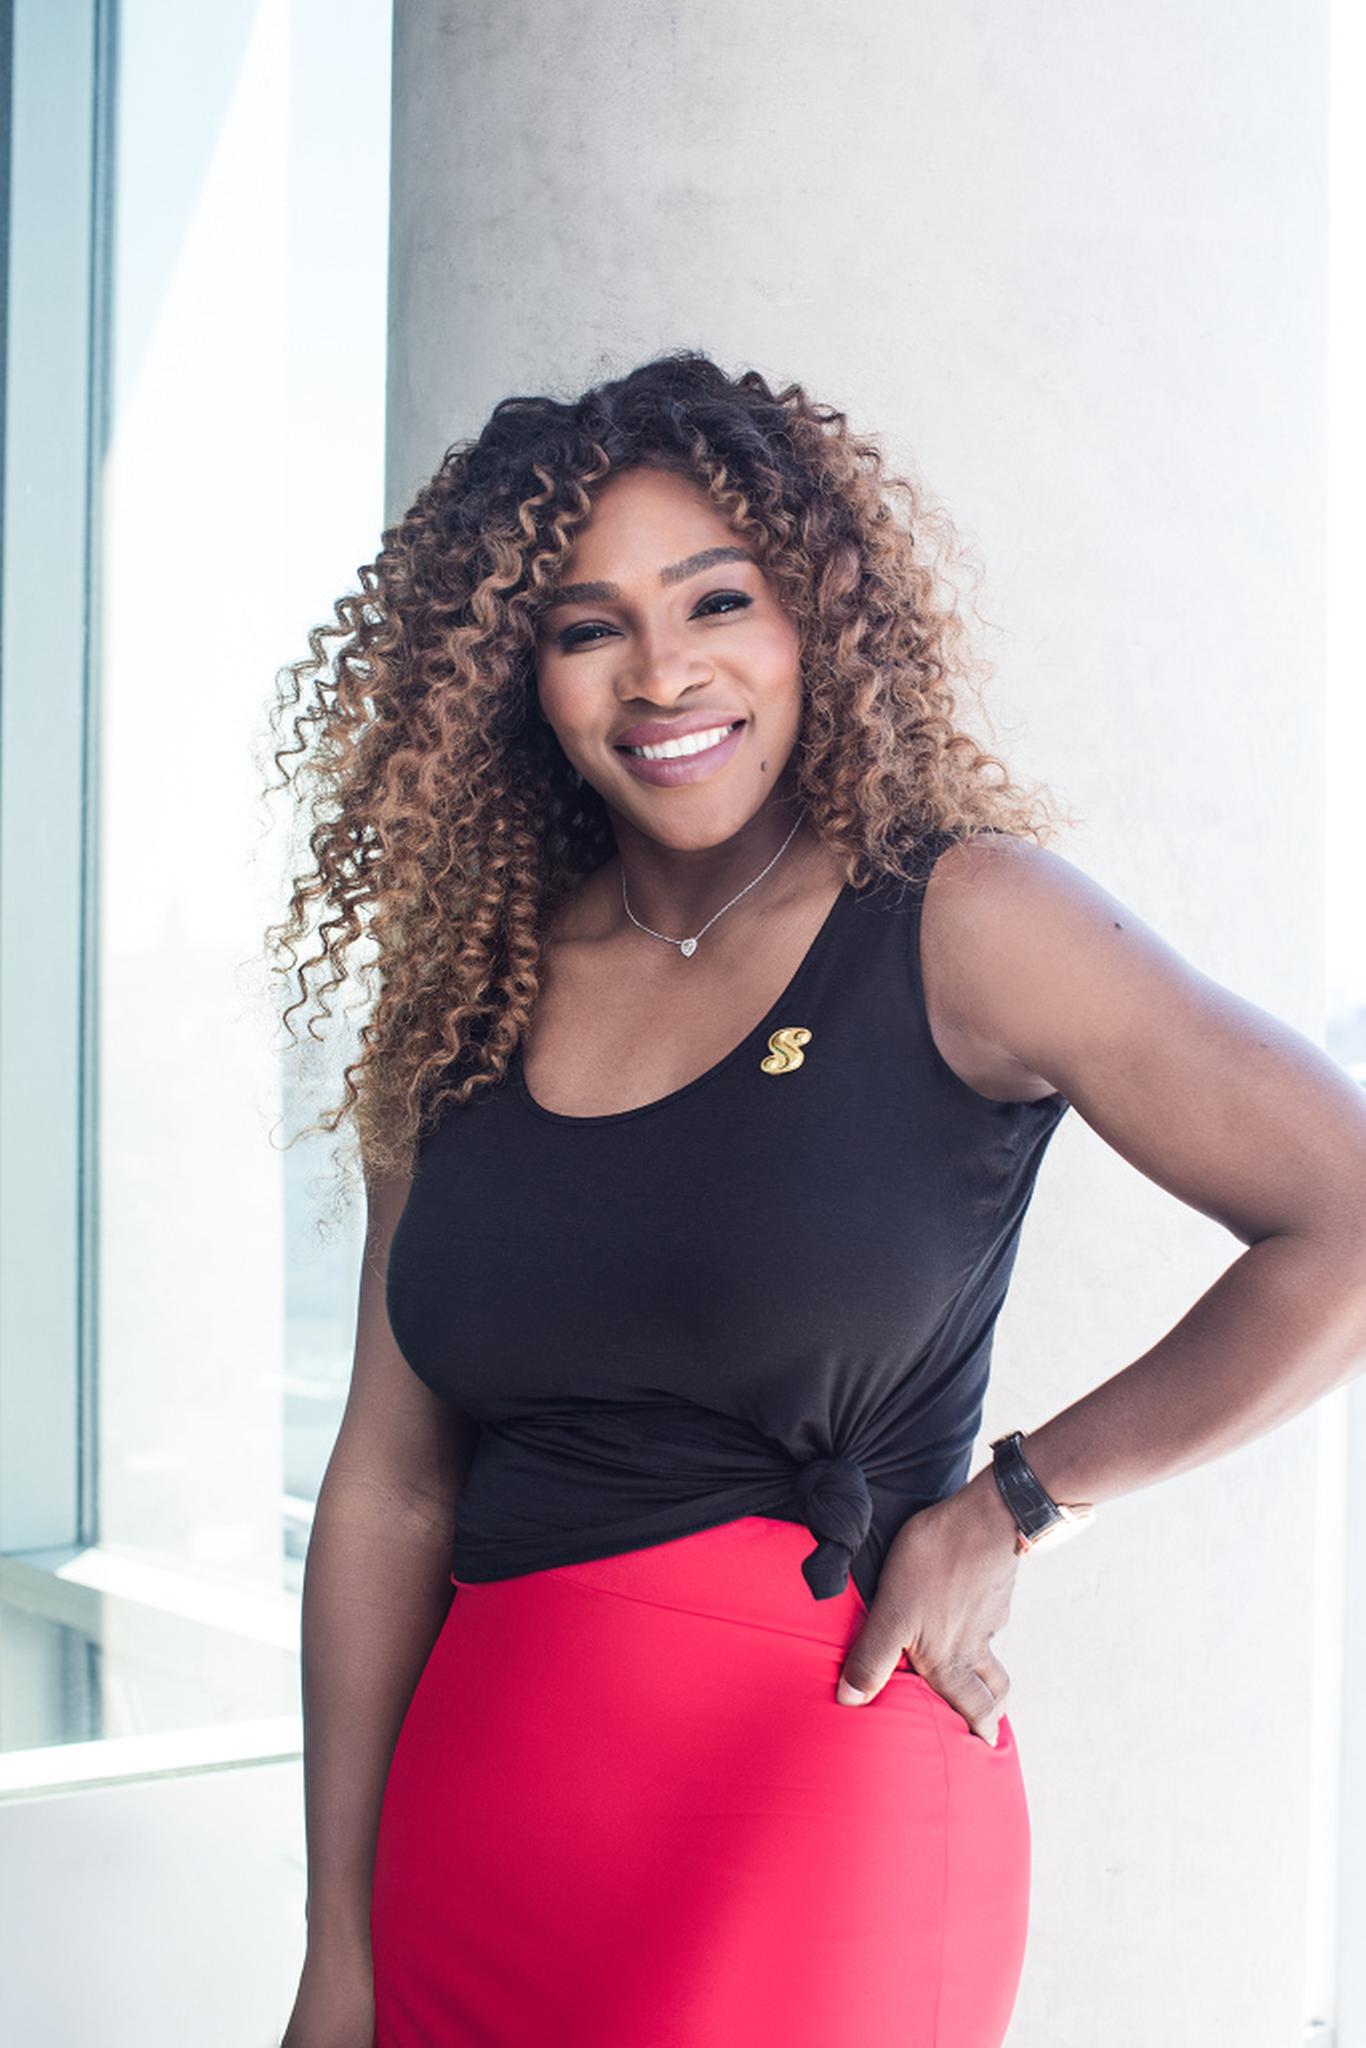 Serena Williams Launches Her Own Clothing Line Fashion News Conversations About Her